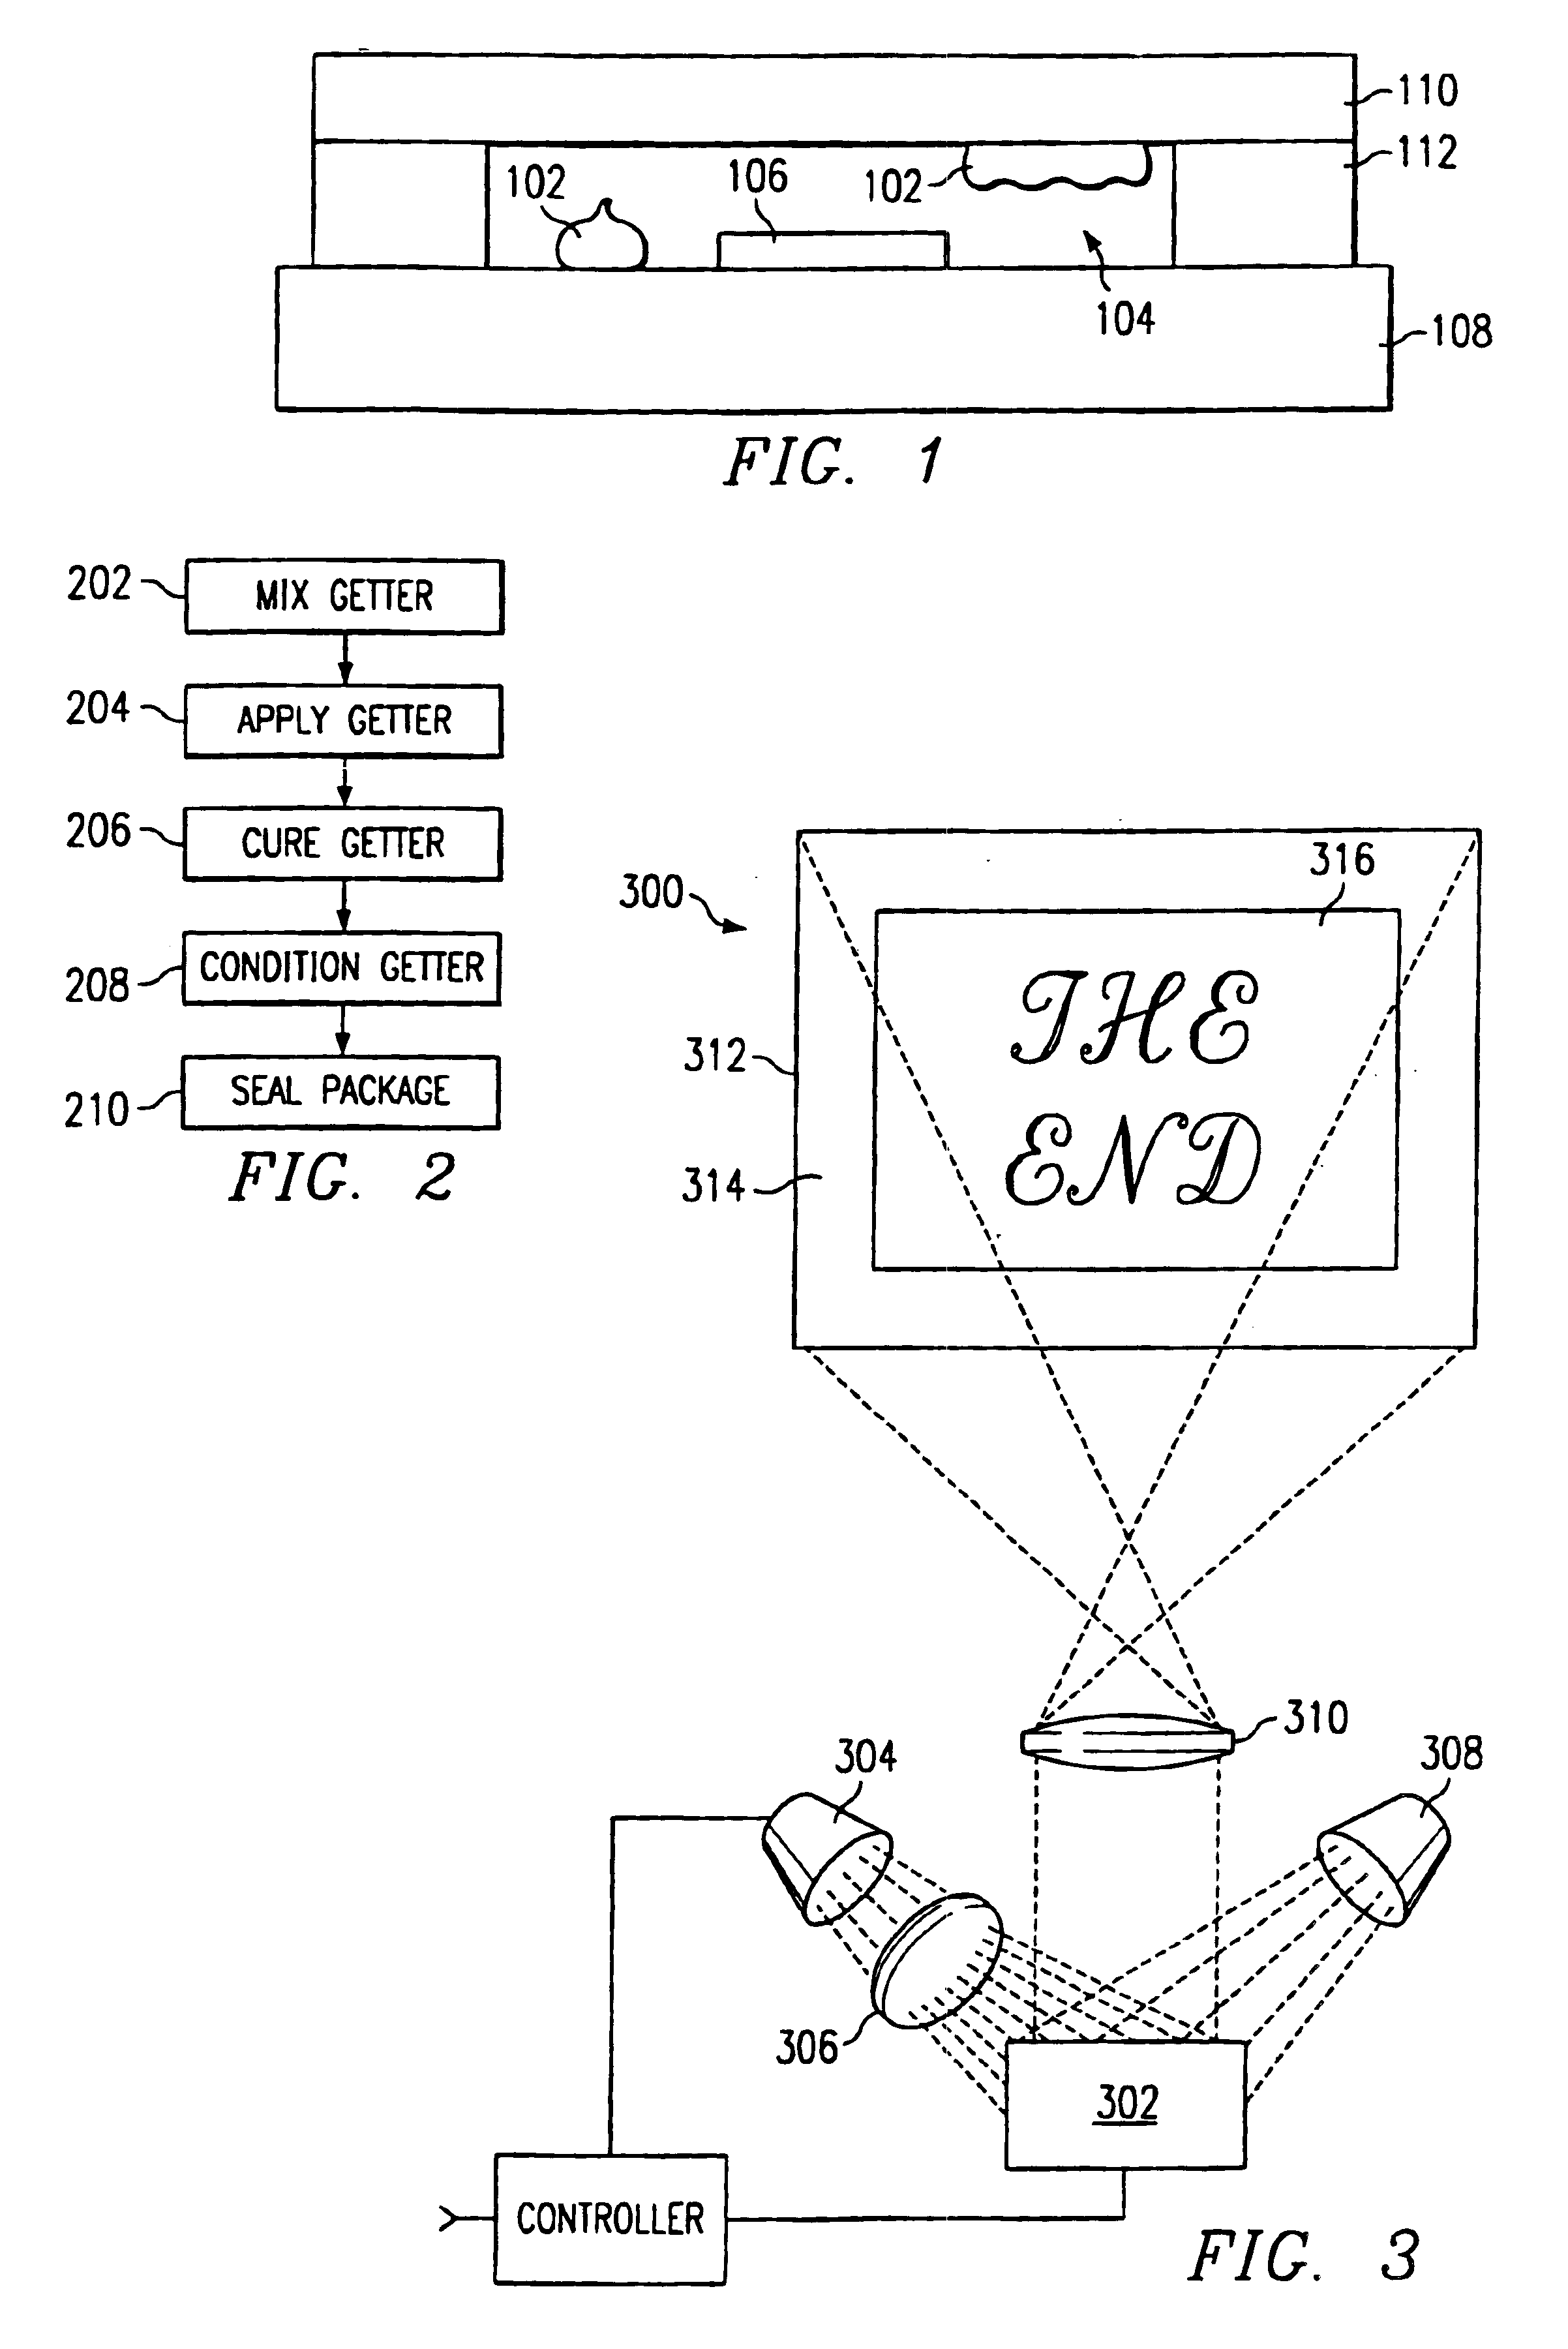 Getter for enhanced micromechanical device performance